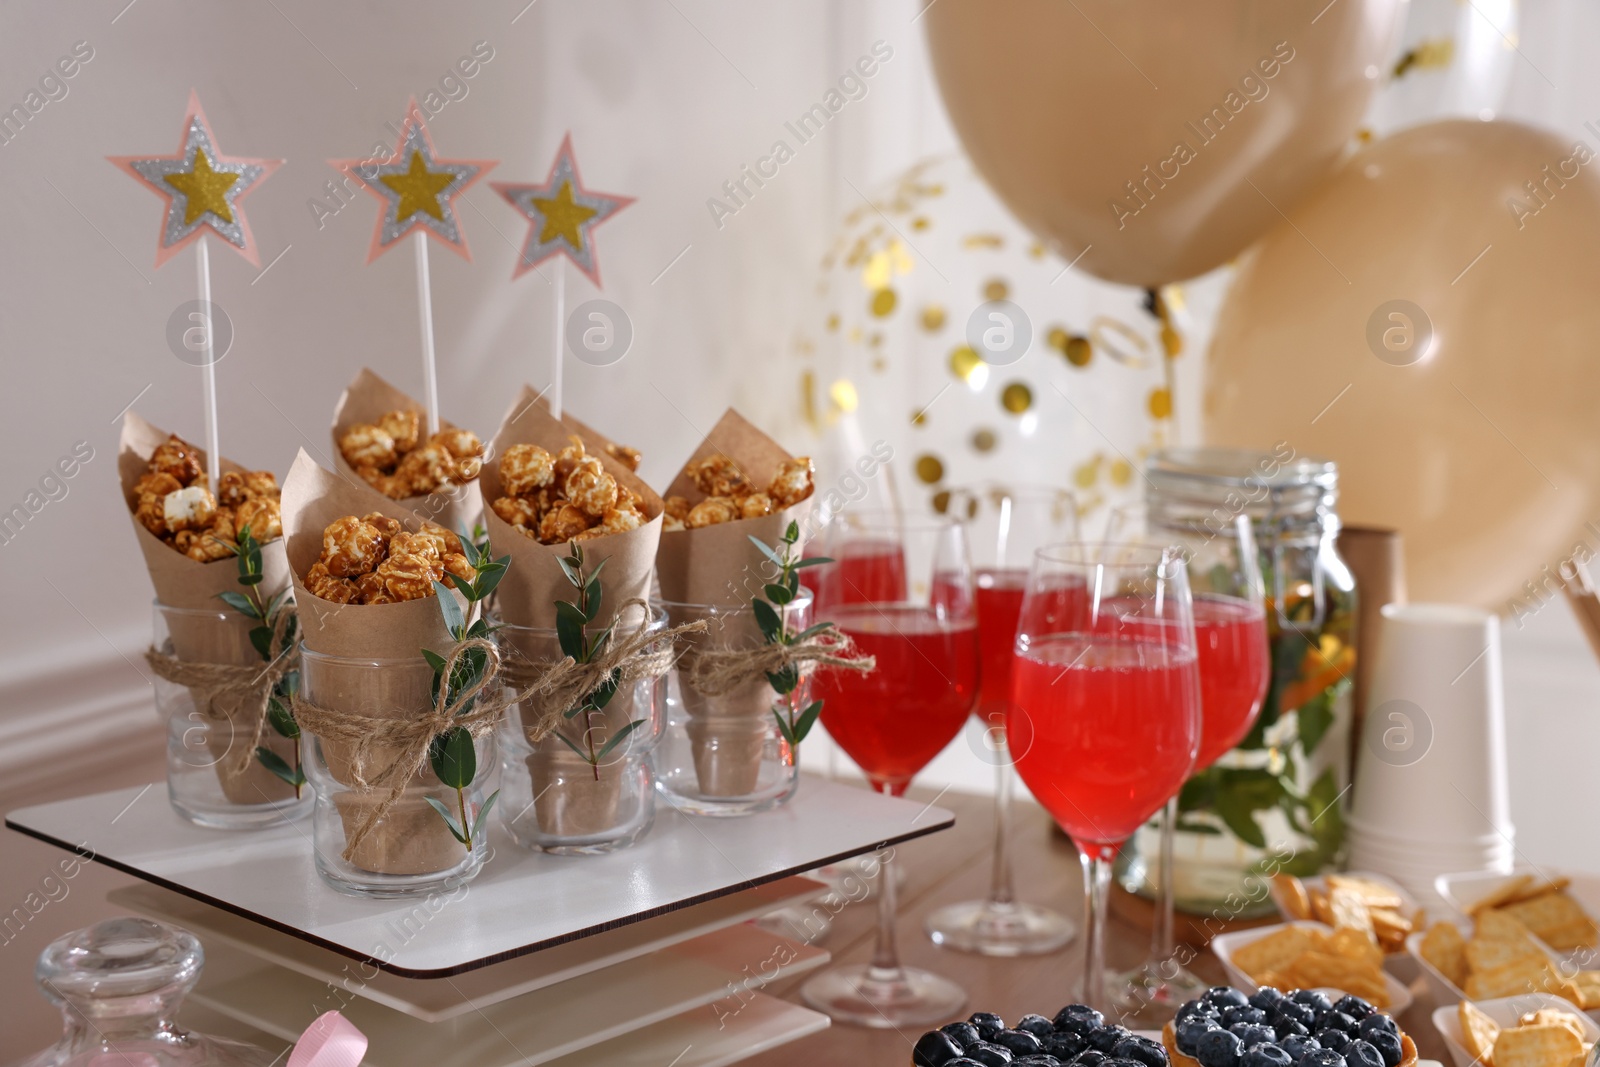 Photo of Delicious party treats and drinks on wooden table indoors